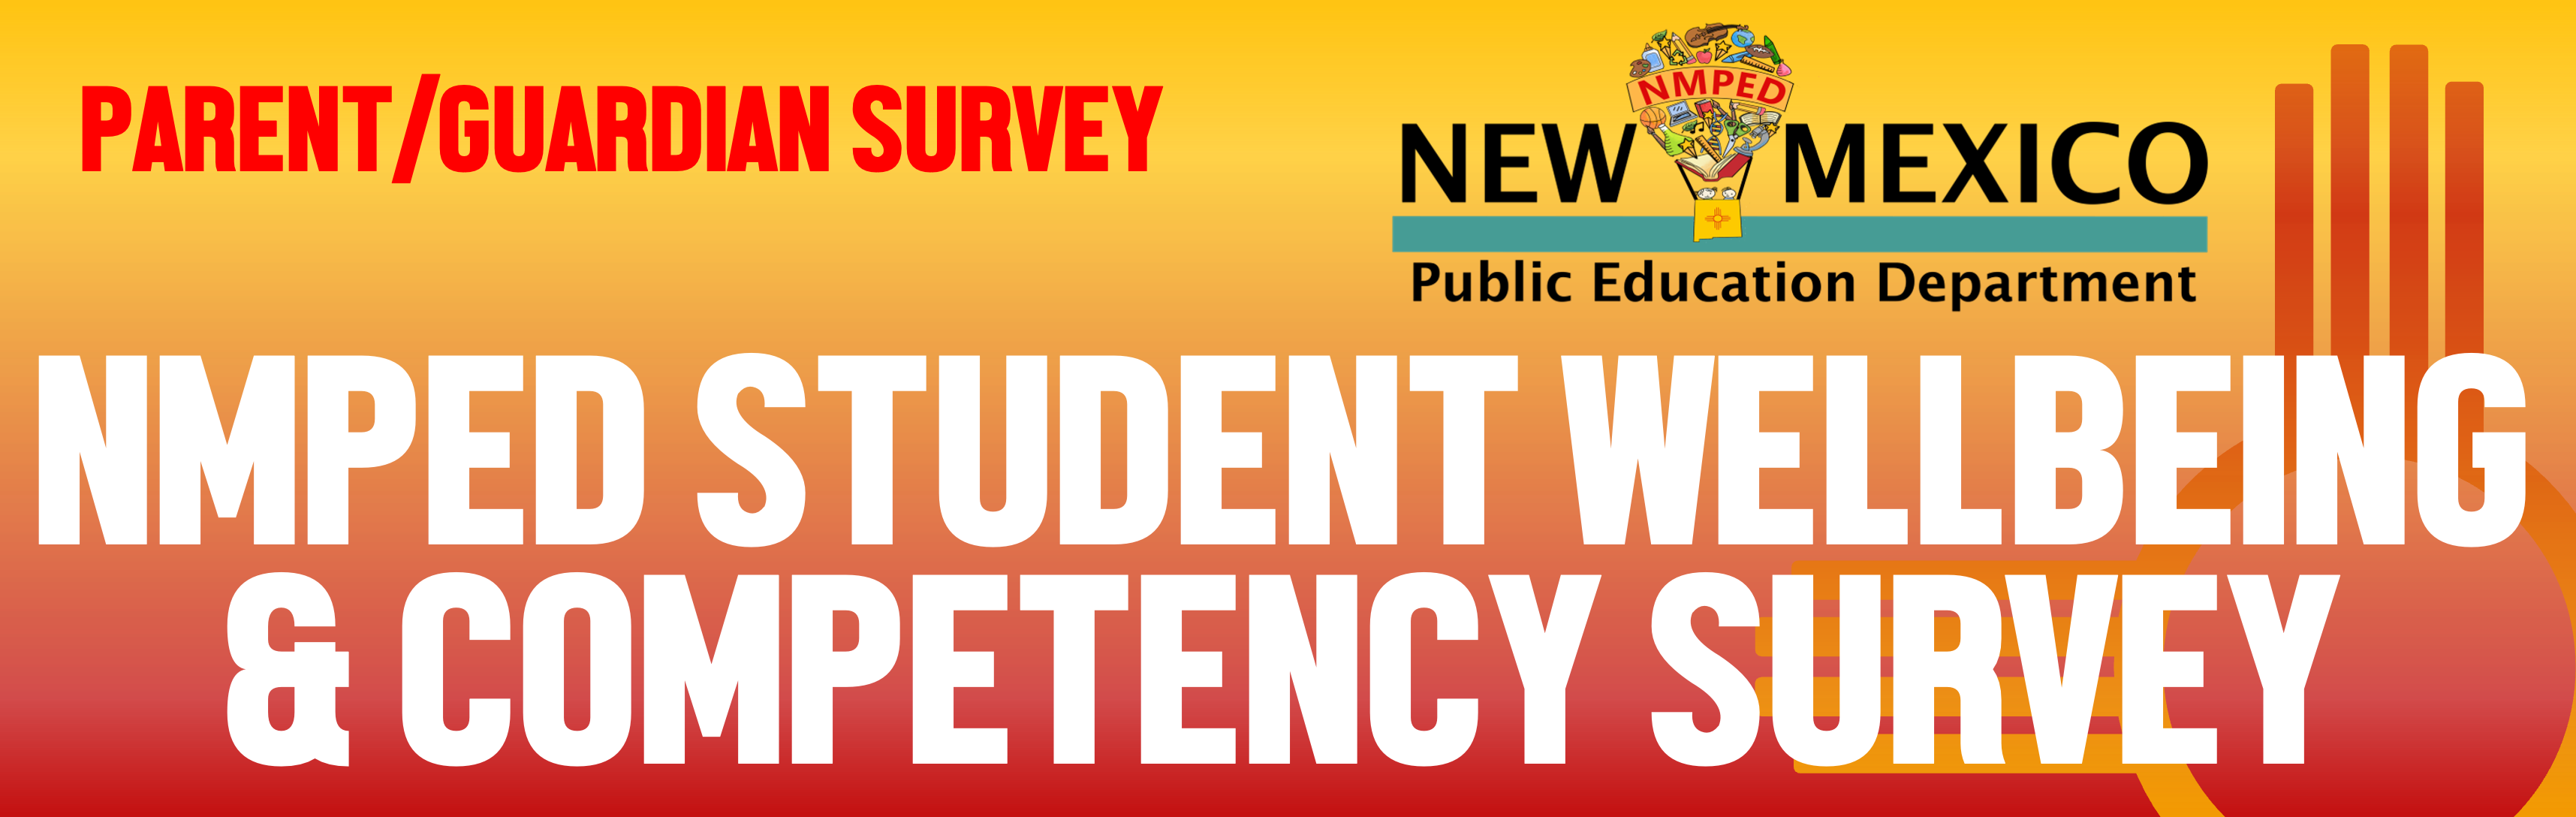 Parent, Guardian, NMPED Student Wellbeing & Competency Survey Header